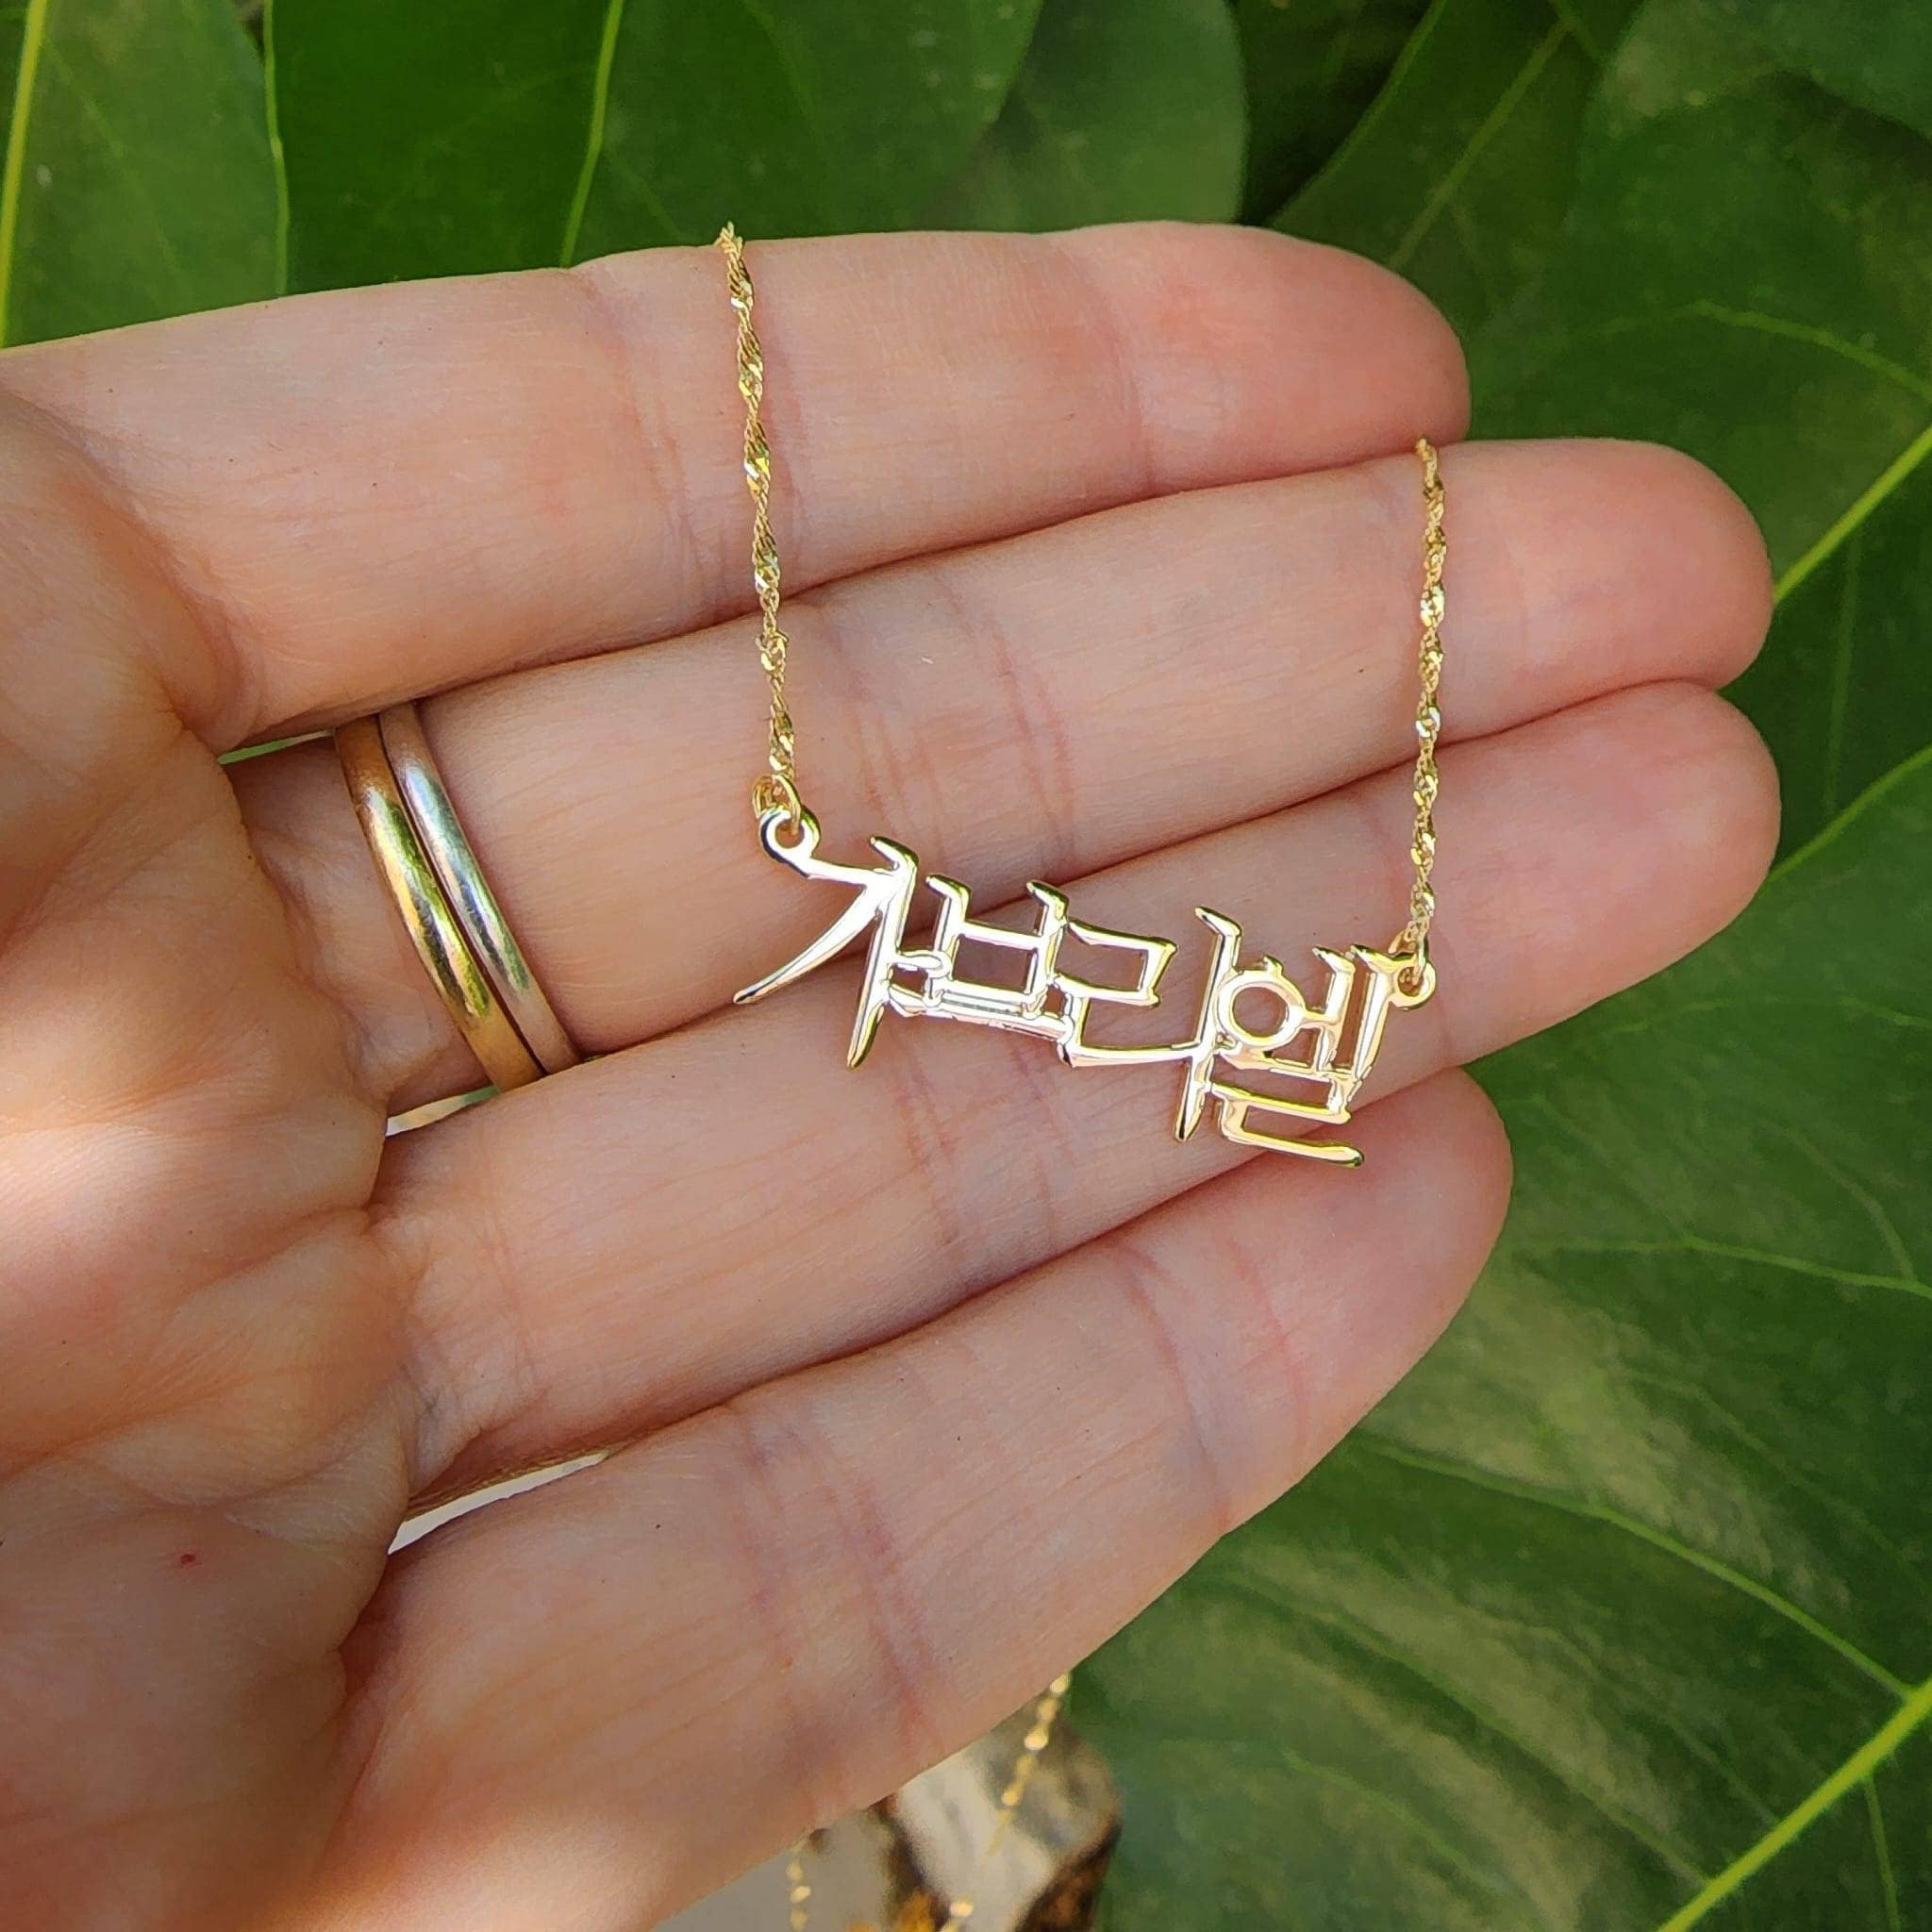 Sha Jin Clavicle 24k Gold Necklace 2019 Japanese & Korean Fashion For  Women, 18k Gold, Long Lasting, Non Fading Jewelry From Xn121, $26.41 |  DHgate.Com